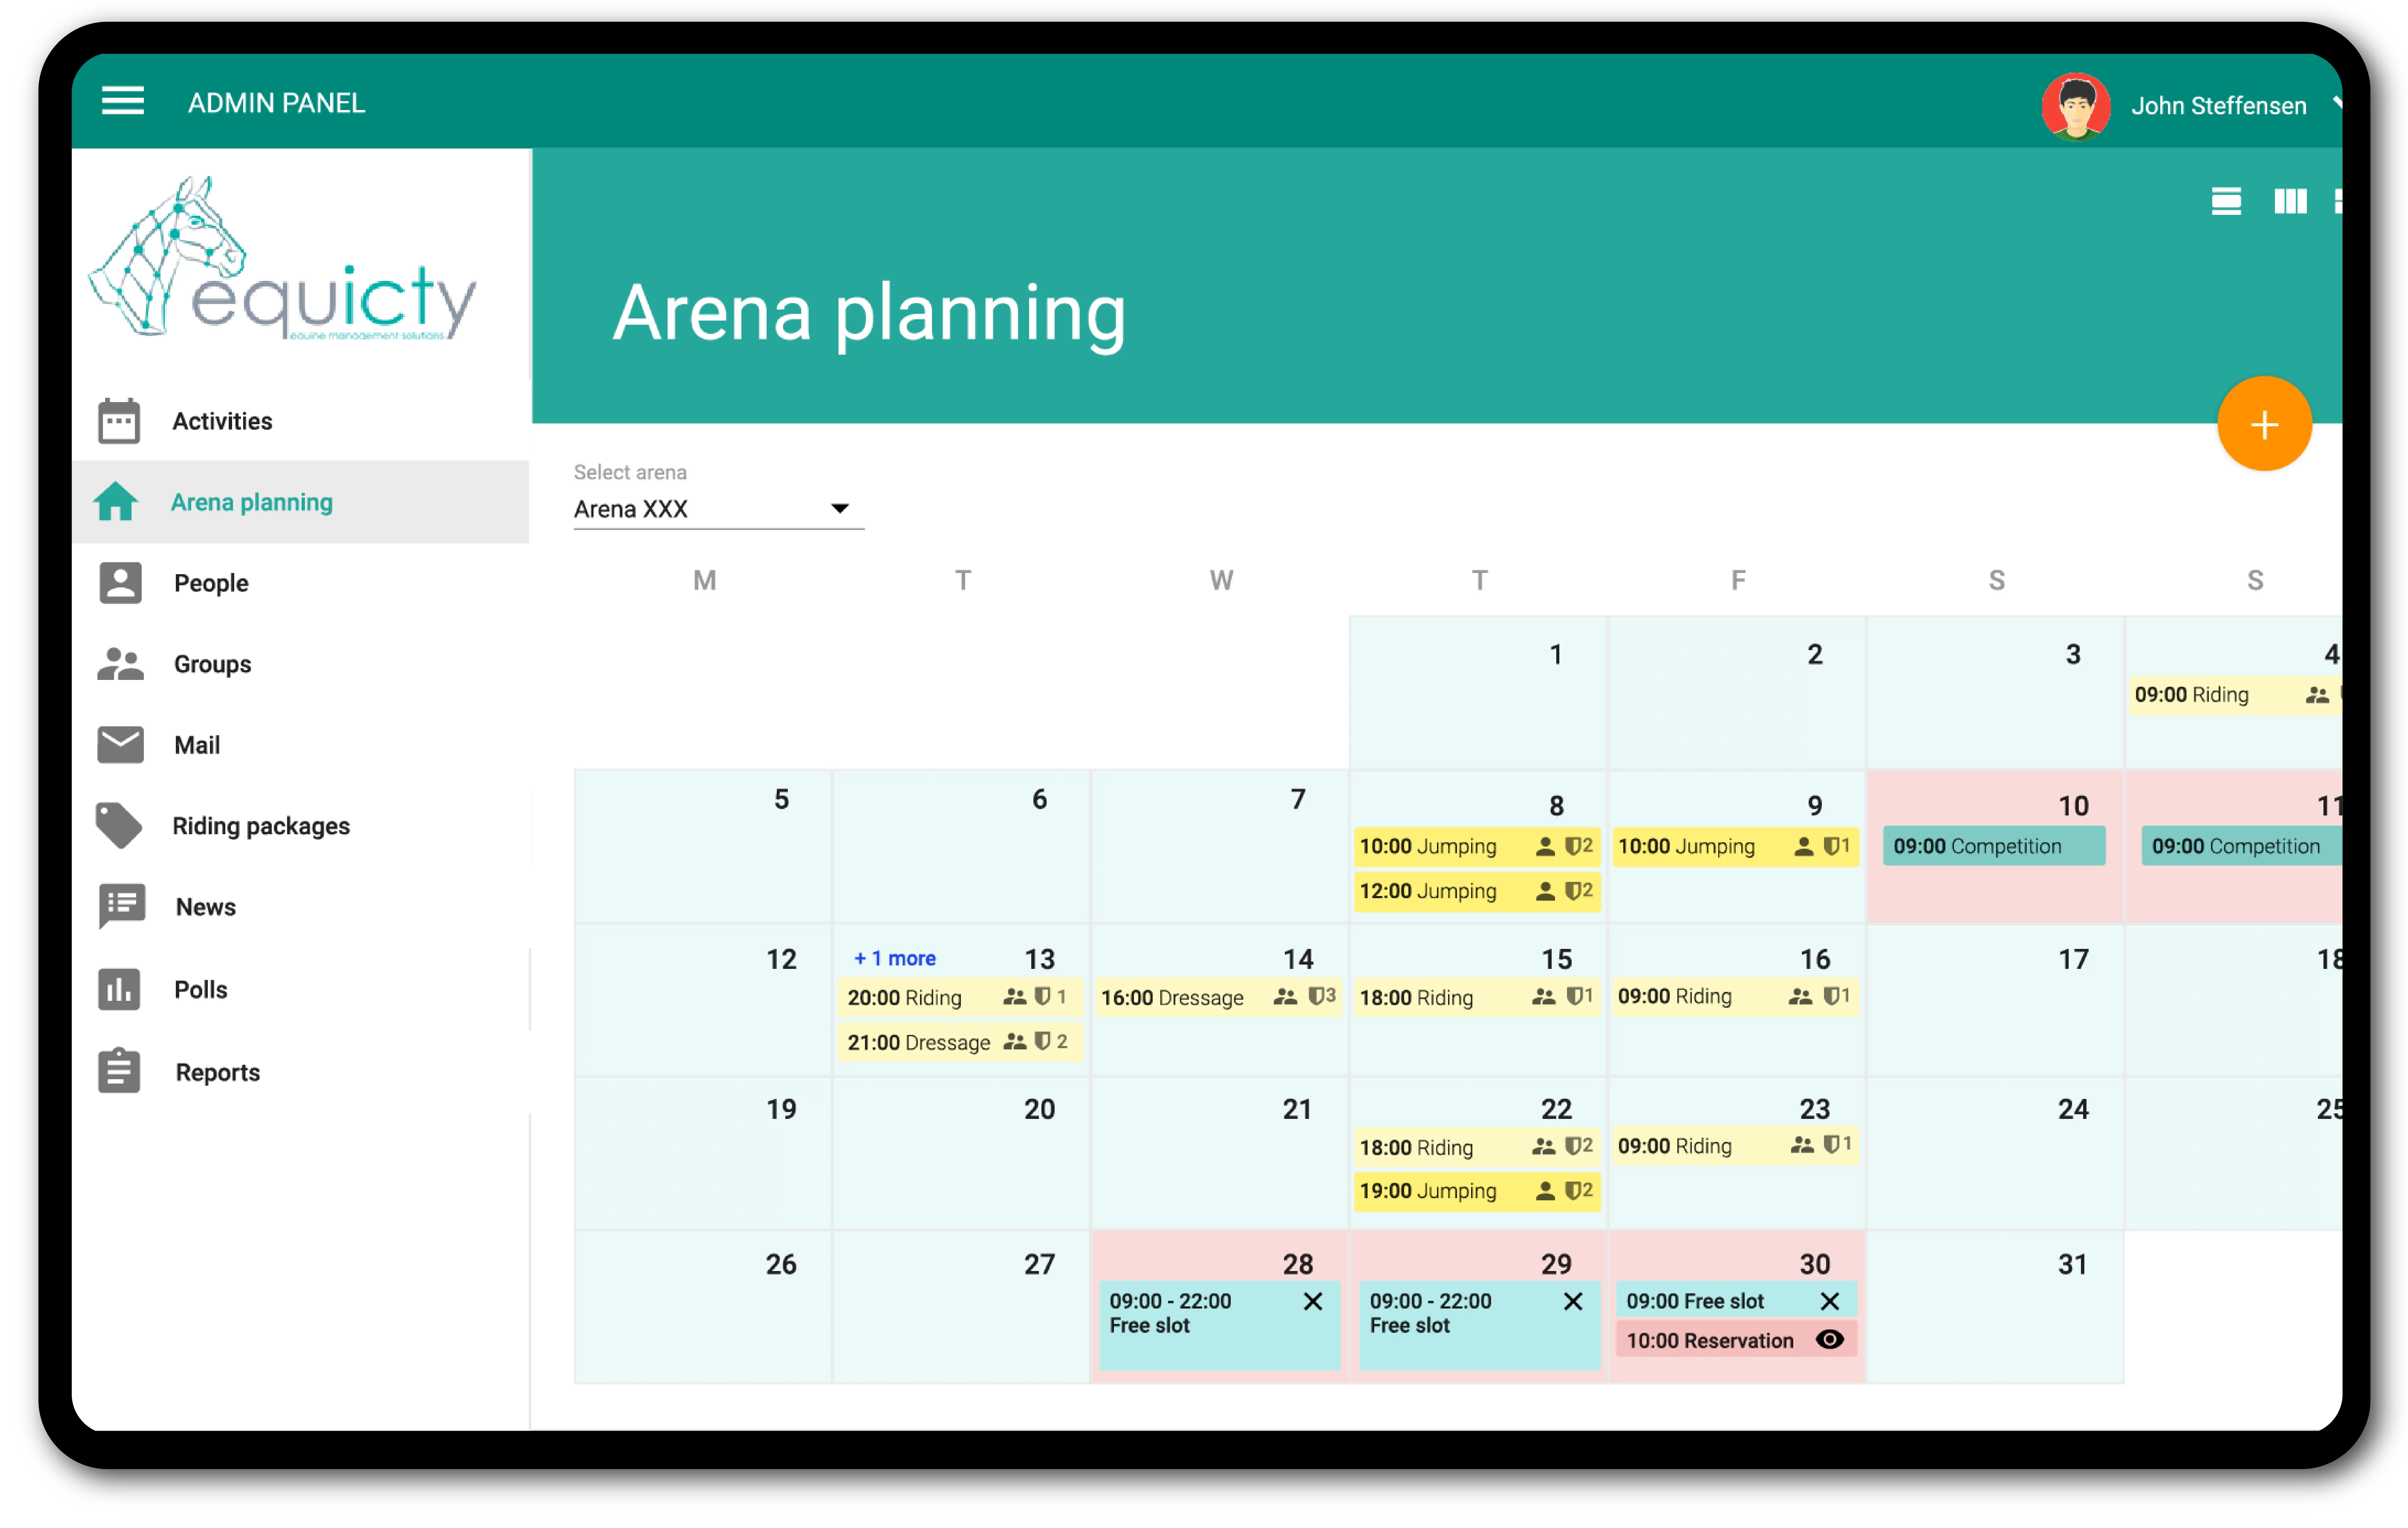 The arena planning tab where the calendar with the schedule of classes for particular arena can be seen